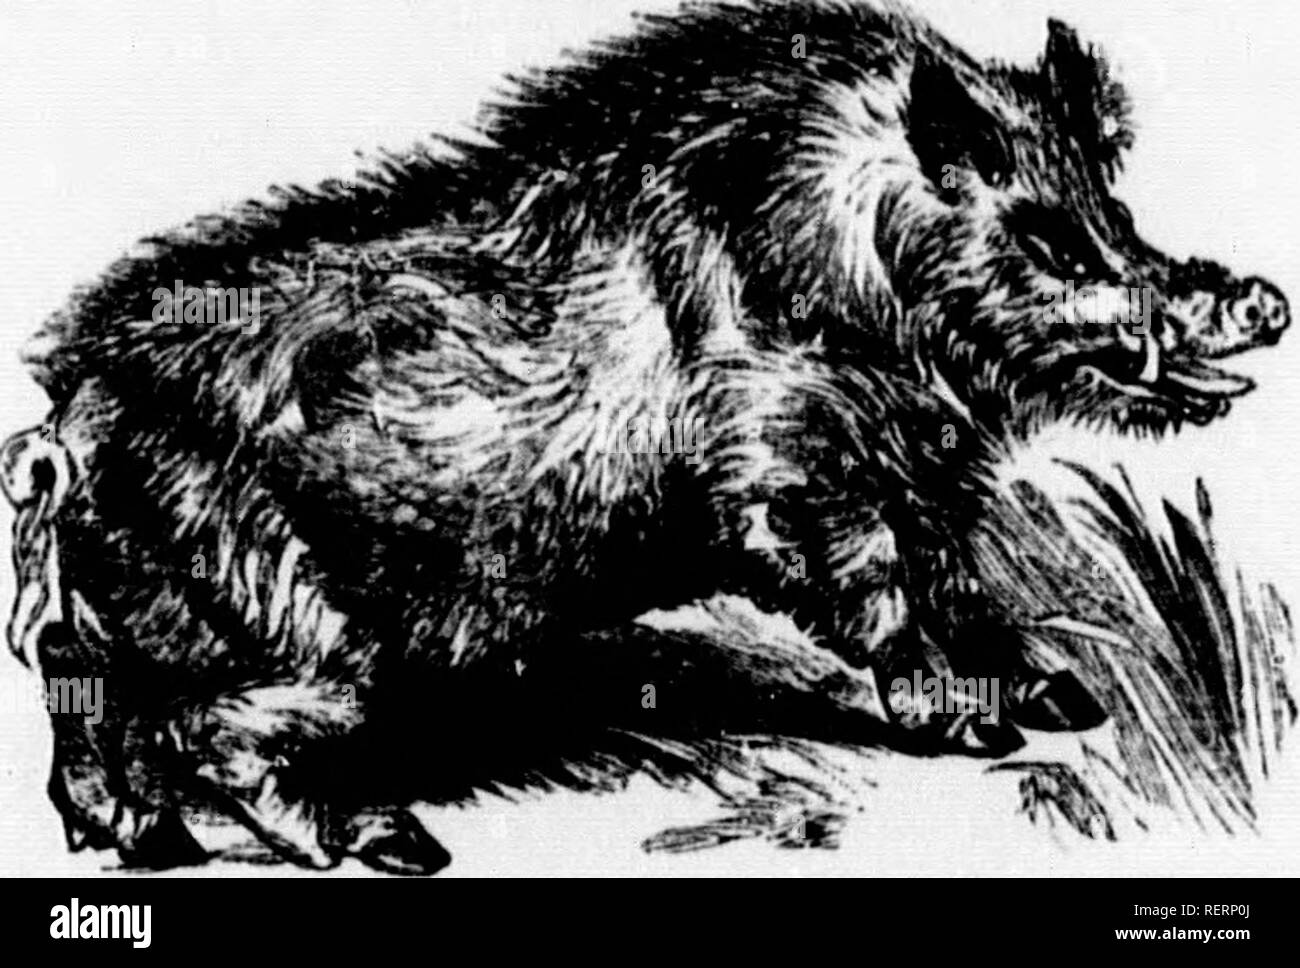 . The illustrated natural history [microform]. Natural history; Sciences naturelles. iVlll. as if a. Sorofu ^Lat. an old Sow), the Boar. The animals composing the Hog tribe are foimd in almost every part of the globe. Their feet are cloven and externally resemble those of the Ruminants, but an examnmtion of the bones at once points out the dift'crence. The WiLU Hog or BoAit inhabits many parts of liiUroi)e, especially the forests of Germany, where the chiv*e of the wild boiu- is a common amusement. It has become extmct in this country iov many years. Its tusks are temble. Please note that thes Stock Photo